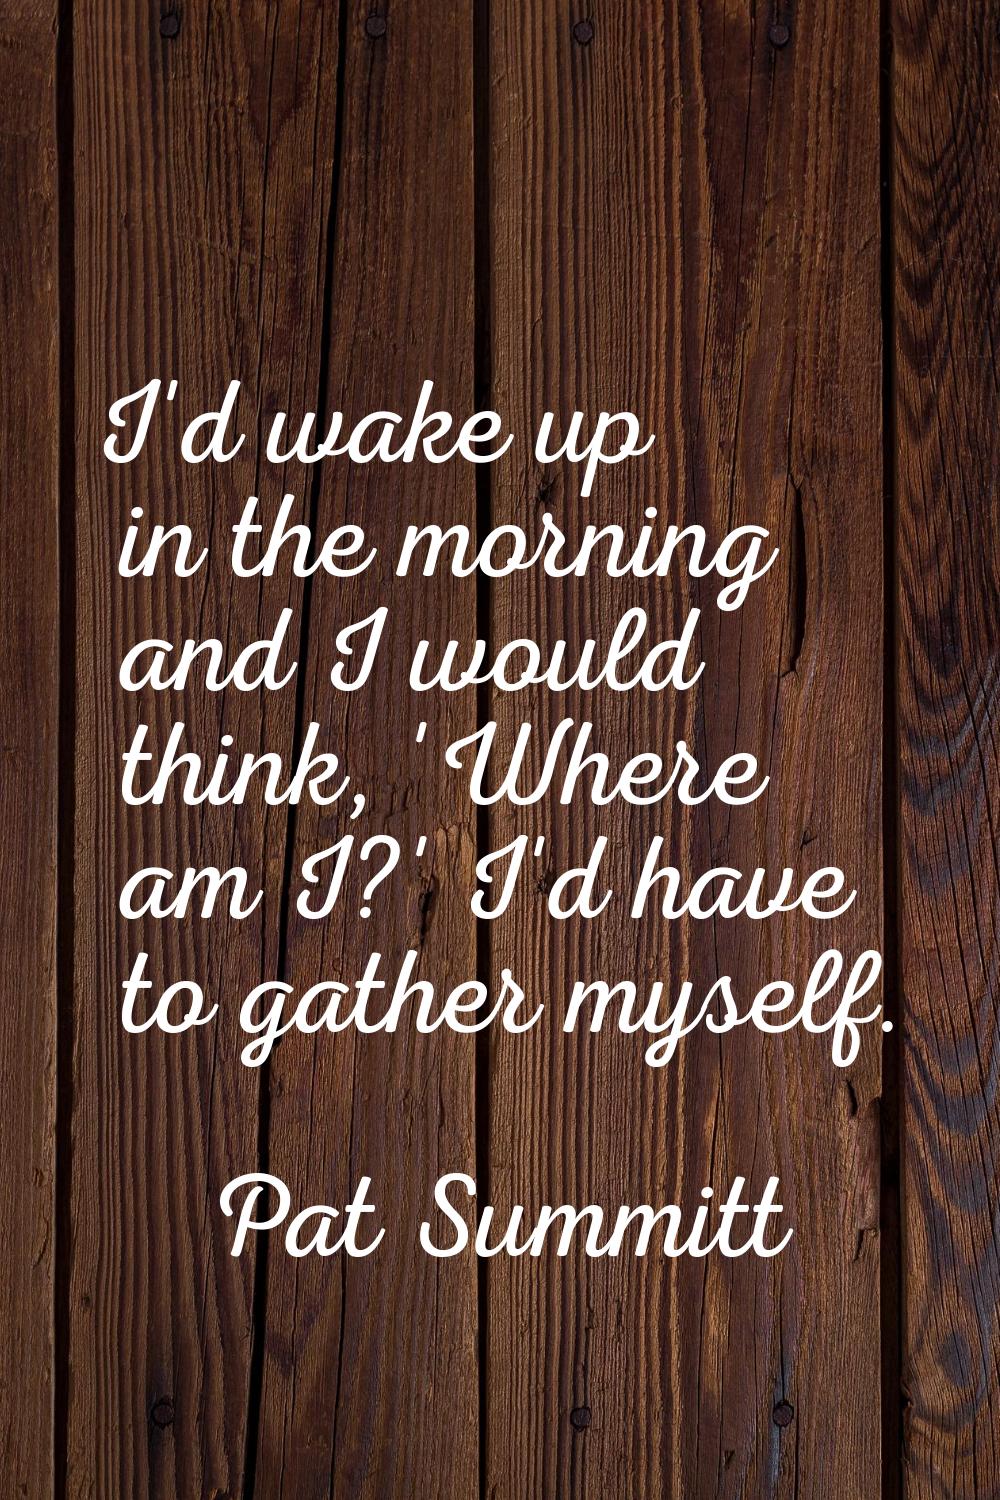 I'd wake up in the morning and I would think, 'Where am I?' I'd have to gather myself.